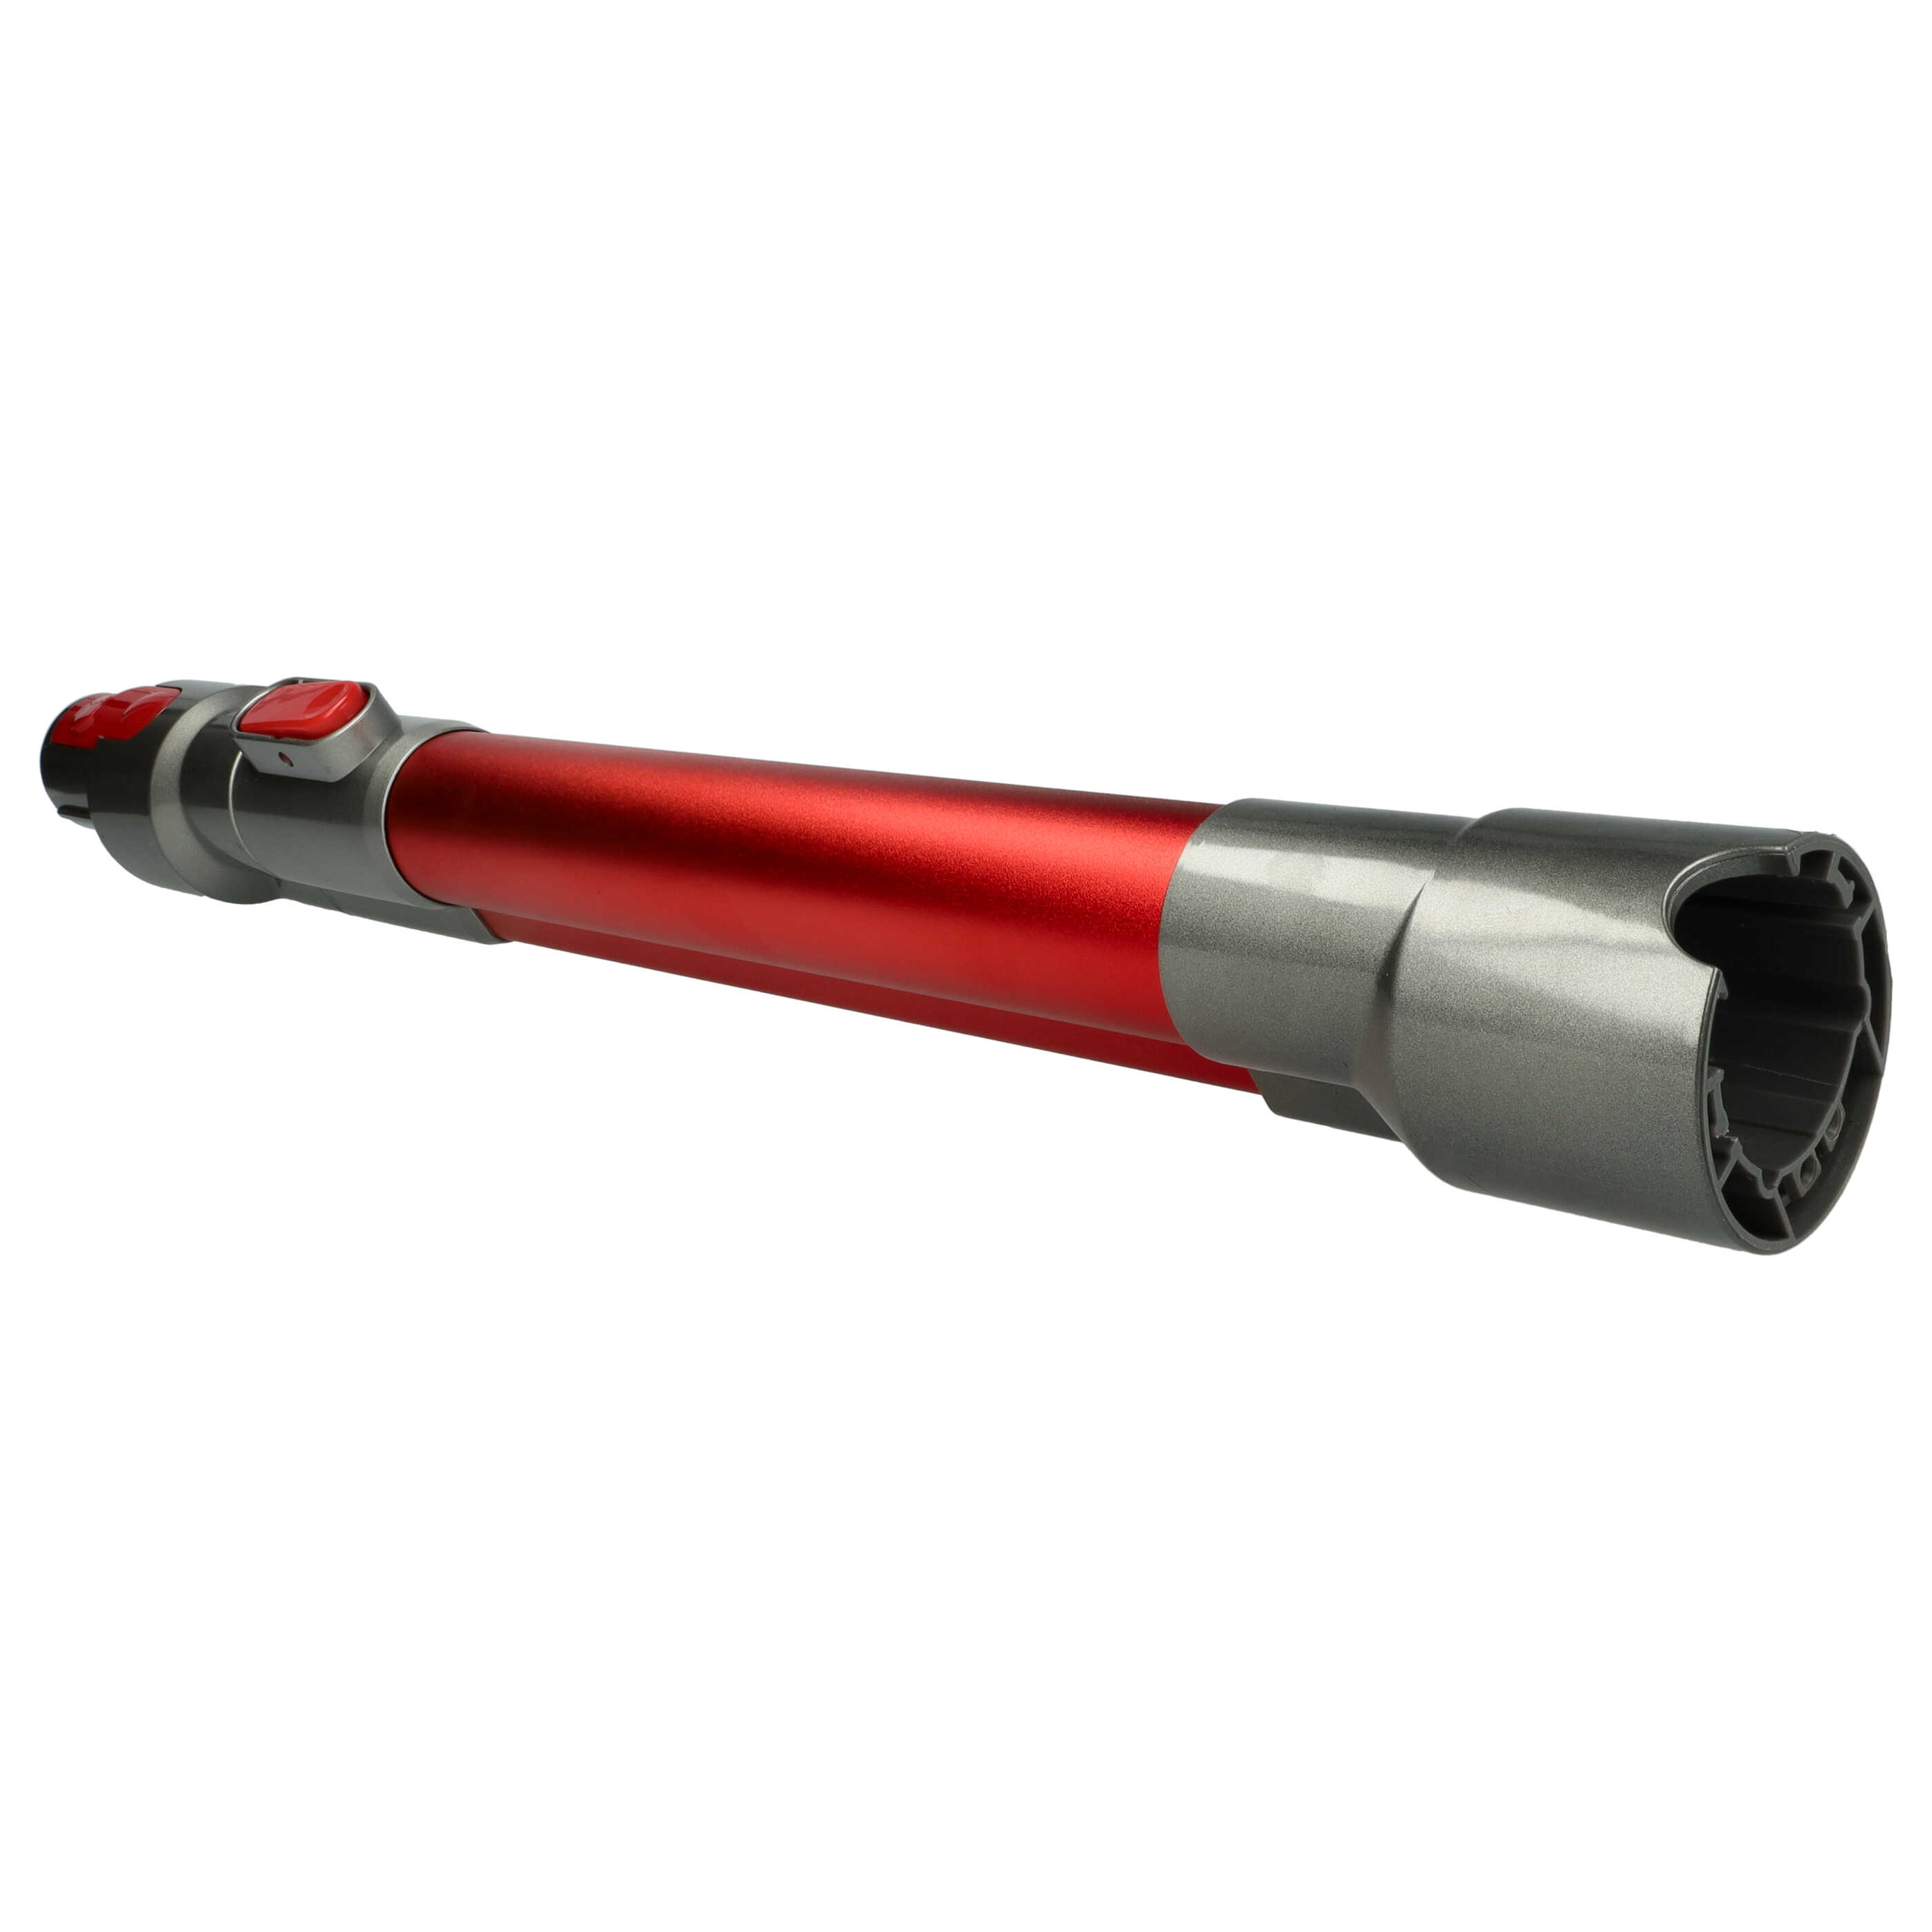 Tube suitable for Dyson StaubsaugerSV10 Vacuum Cleaner - Length: 44.5 - 66.5 cm, red